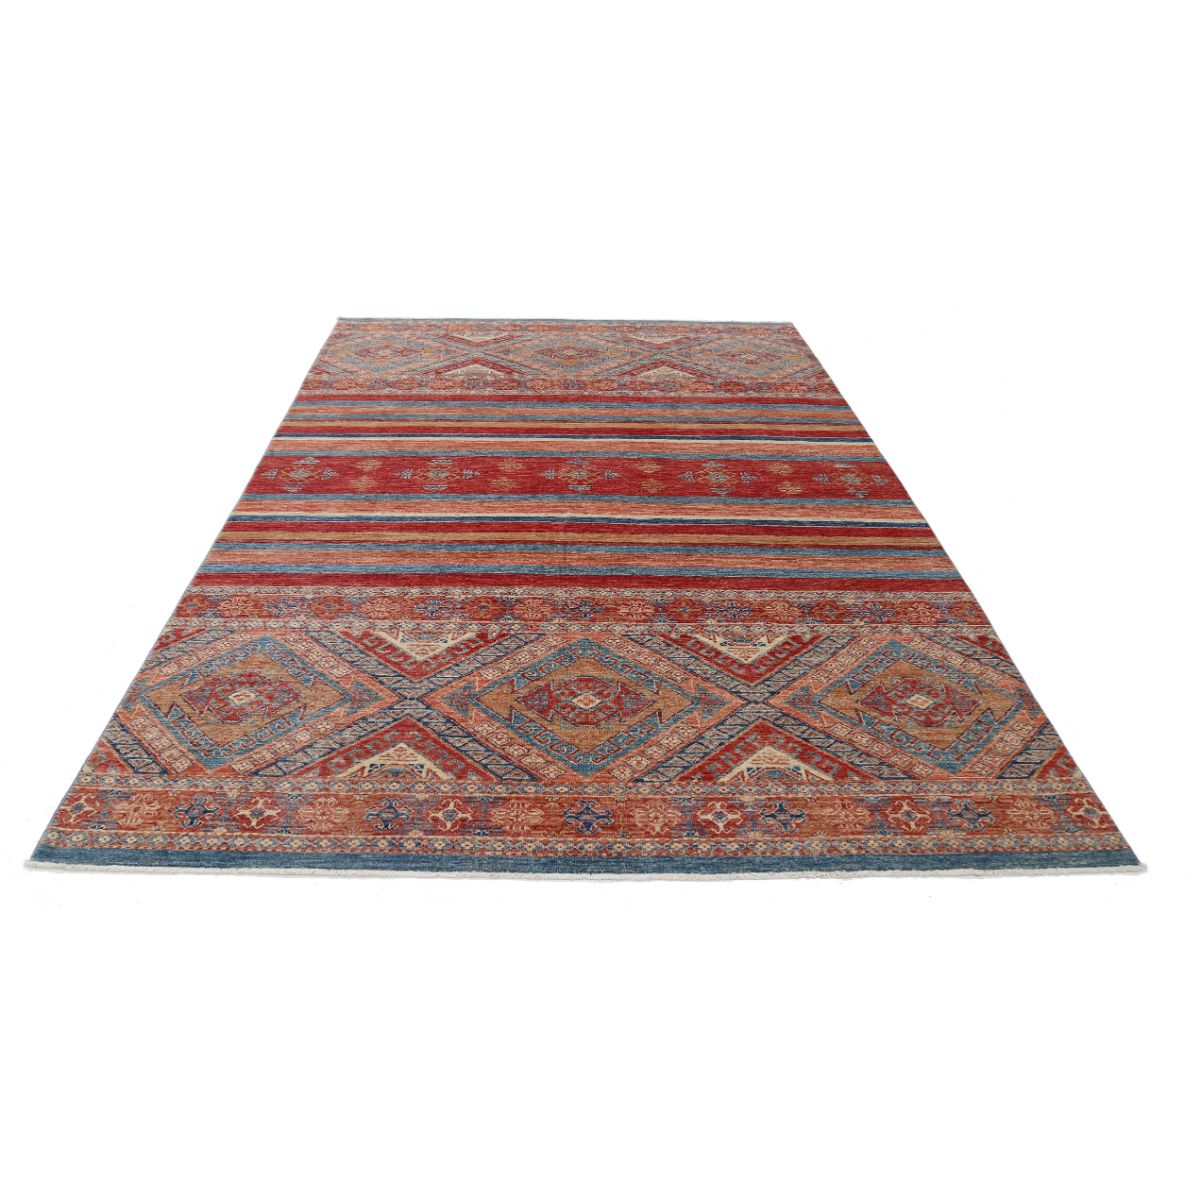 Khurjeen 6'6" X 9'4" Wool Hand-Knotted Rug